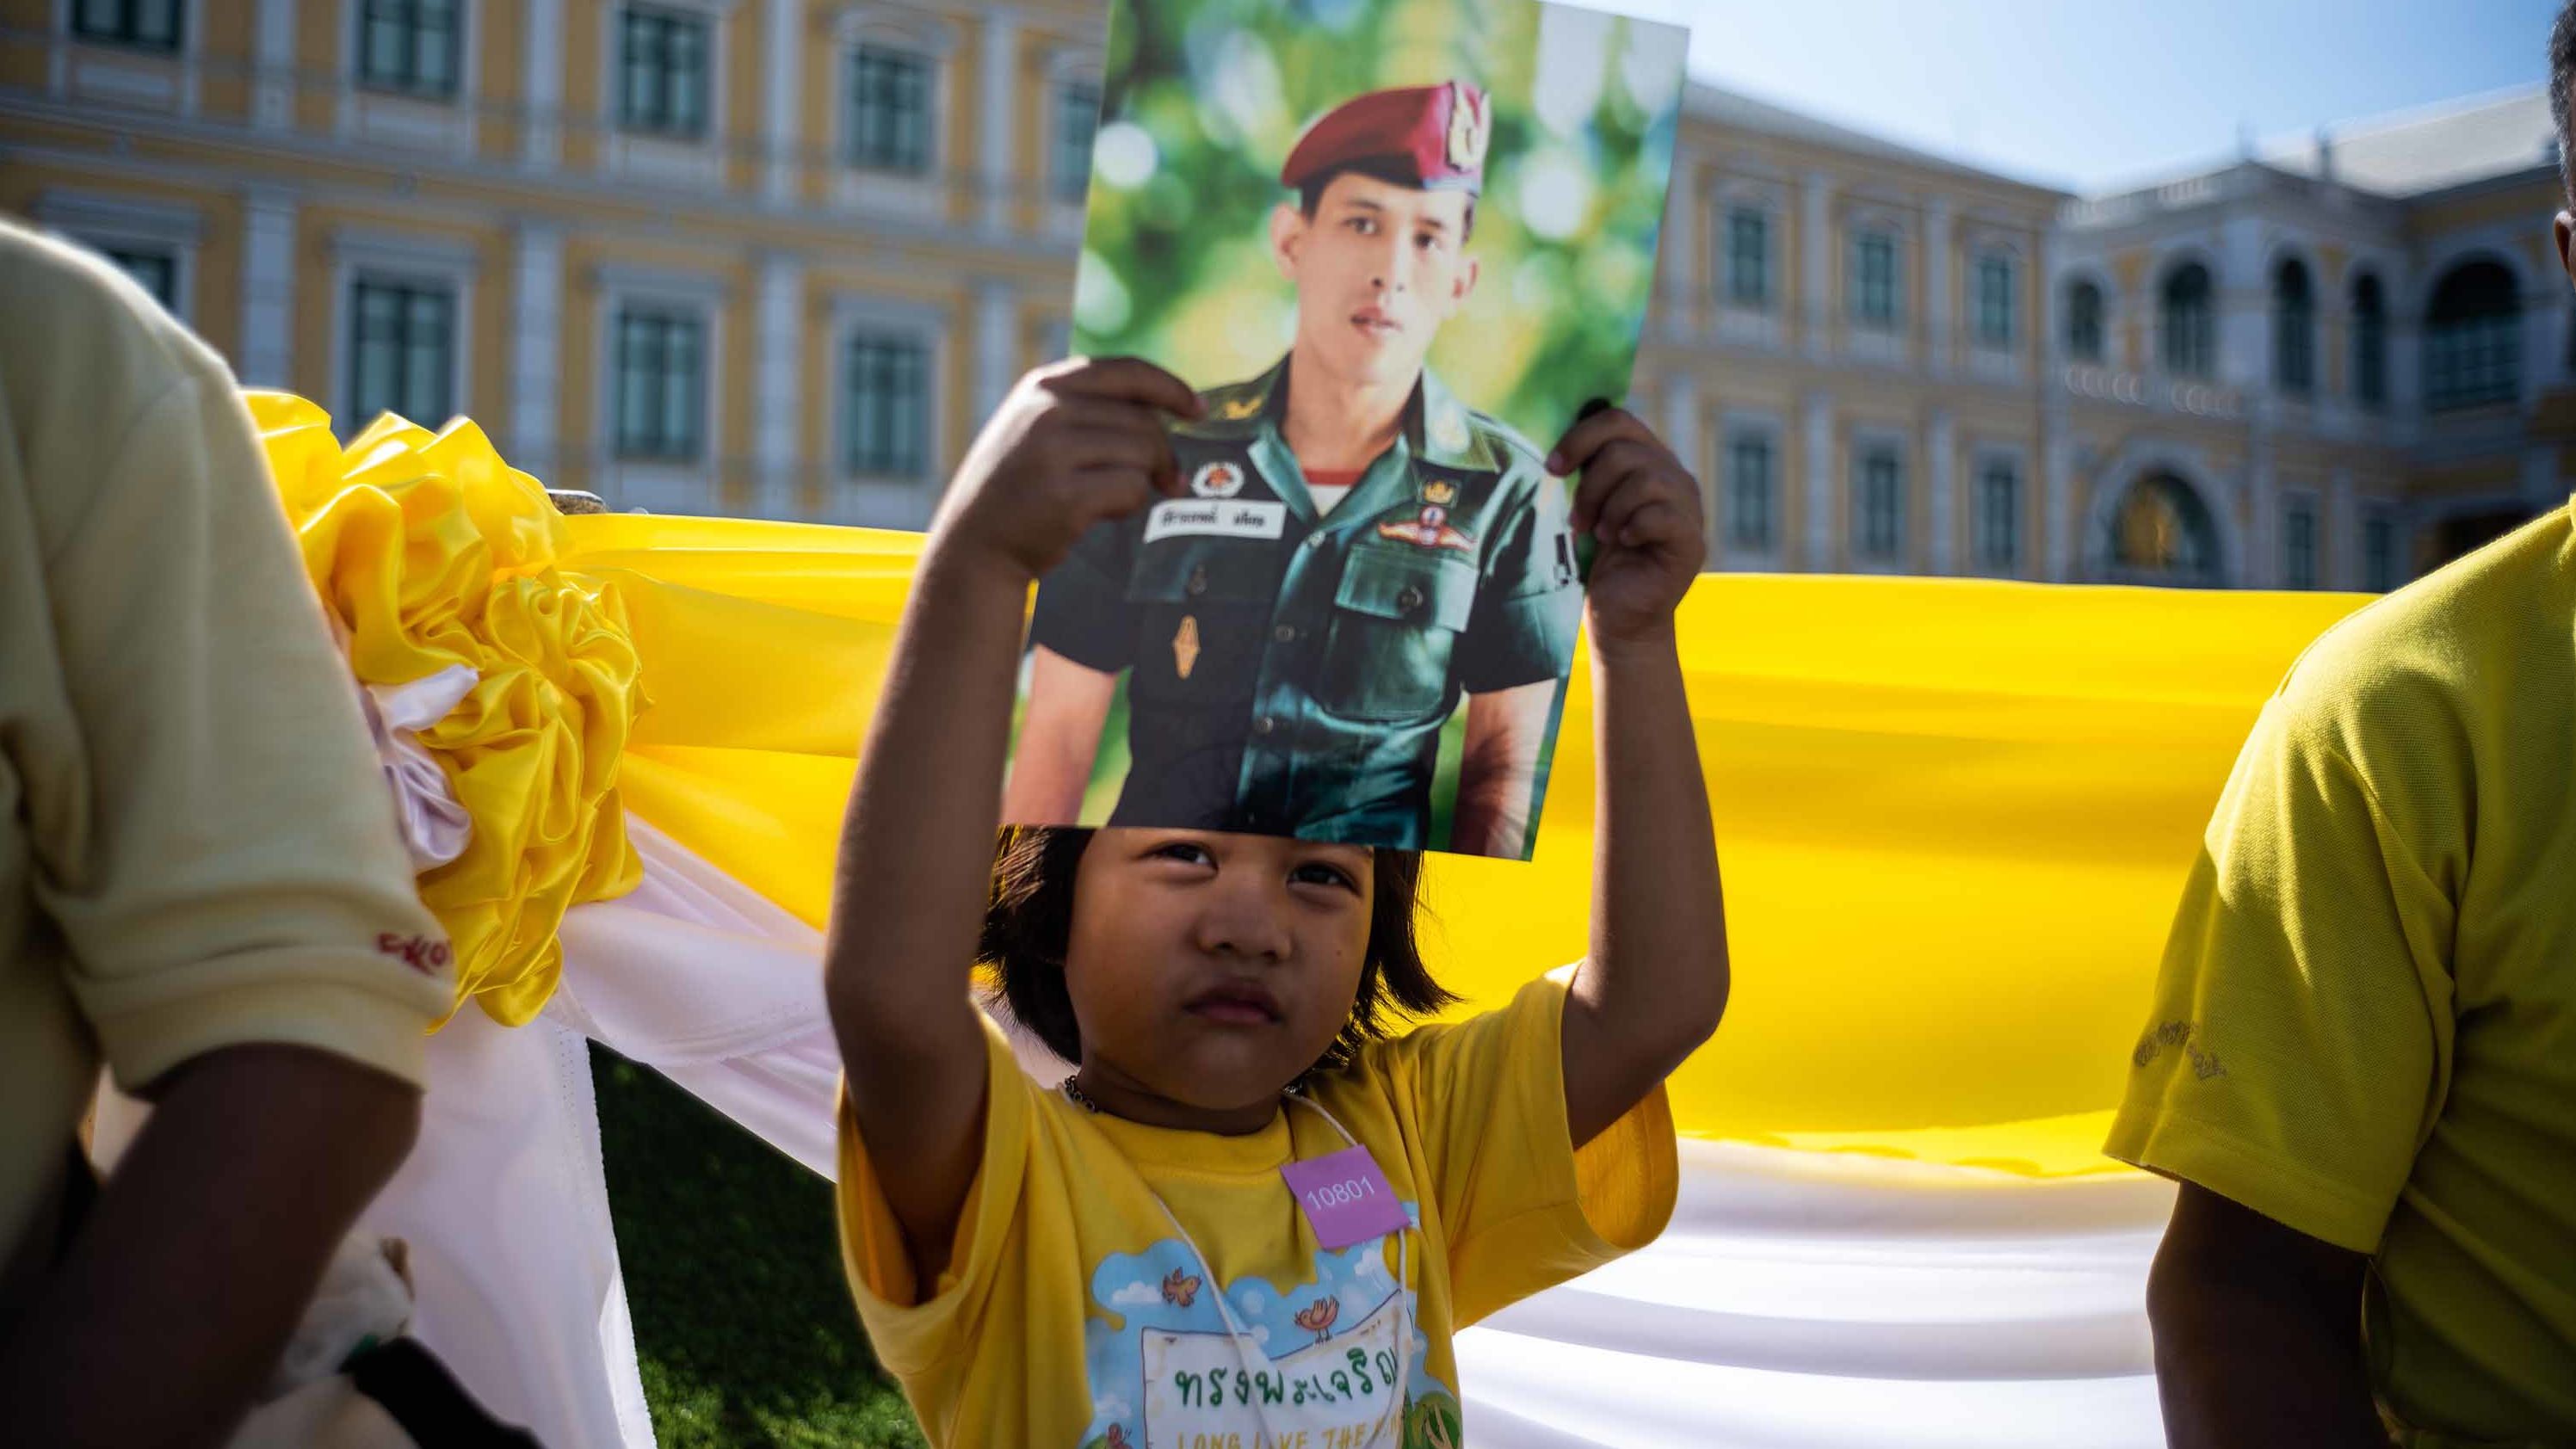 A child holds a portrait of King Vajiralongkorn as she waits with others near the Grand Palace during the coronation on May 4.